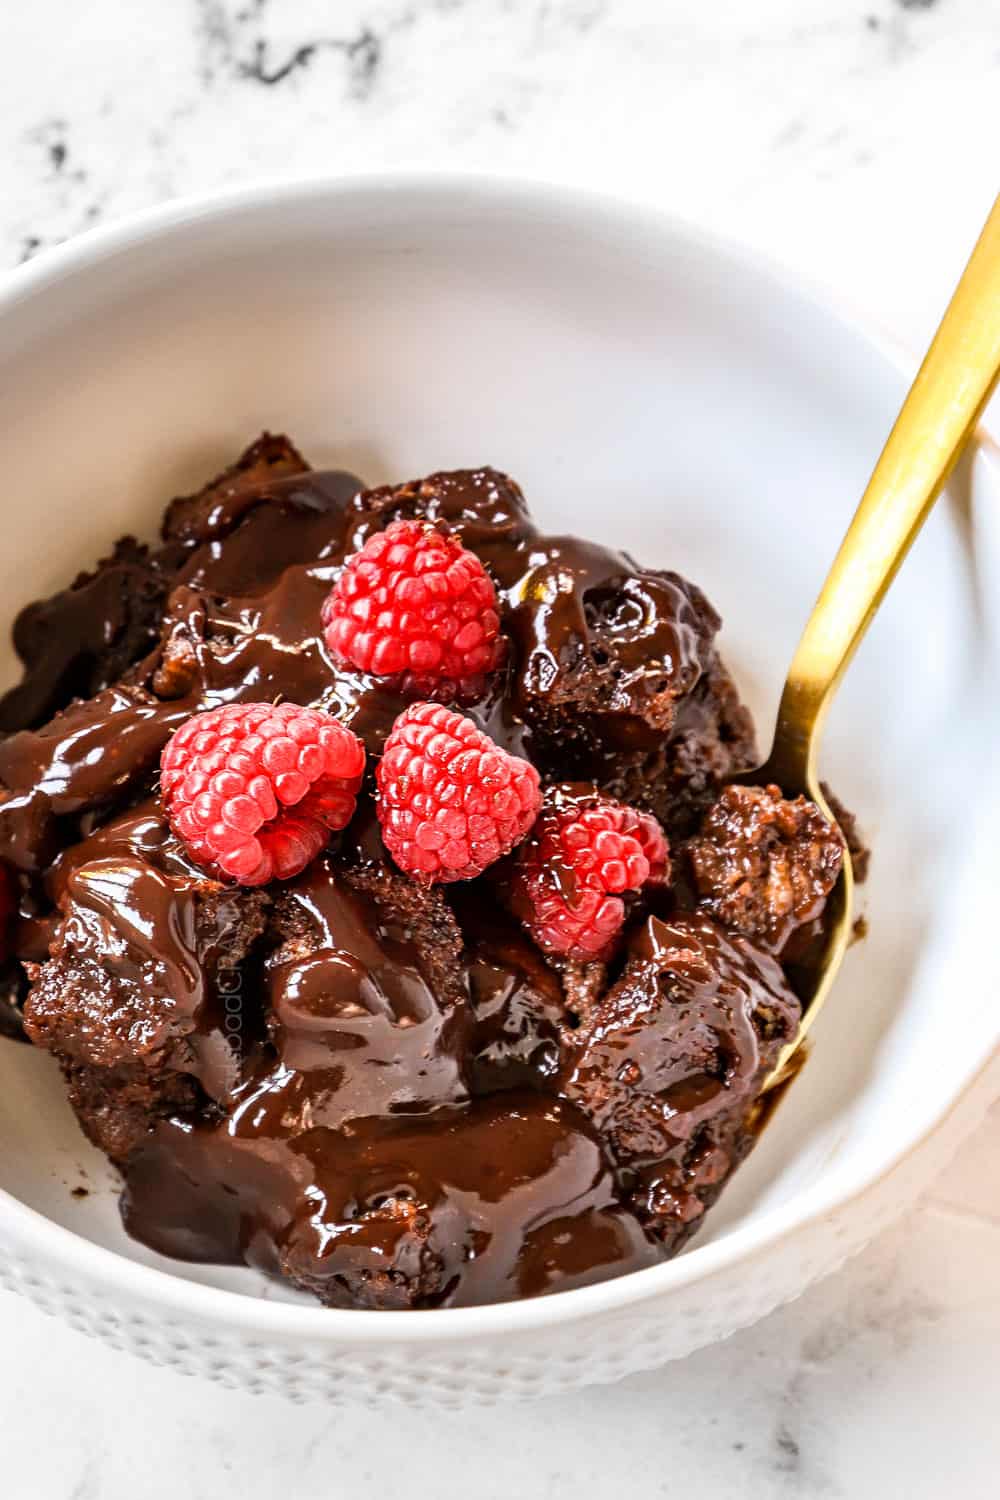 showing how to serve chocolate bread pudding by serving in a white bowl with chocolate sauce and raspberries